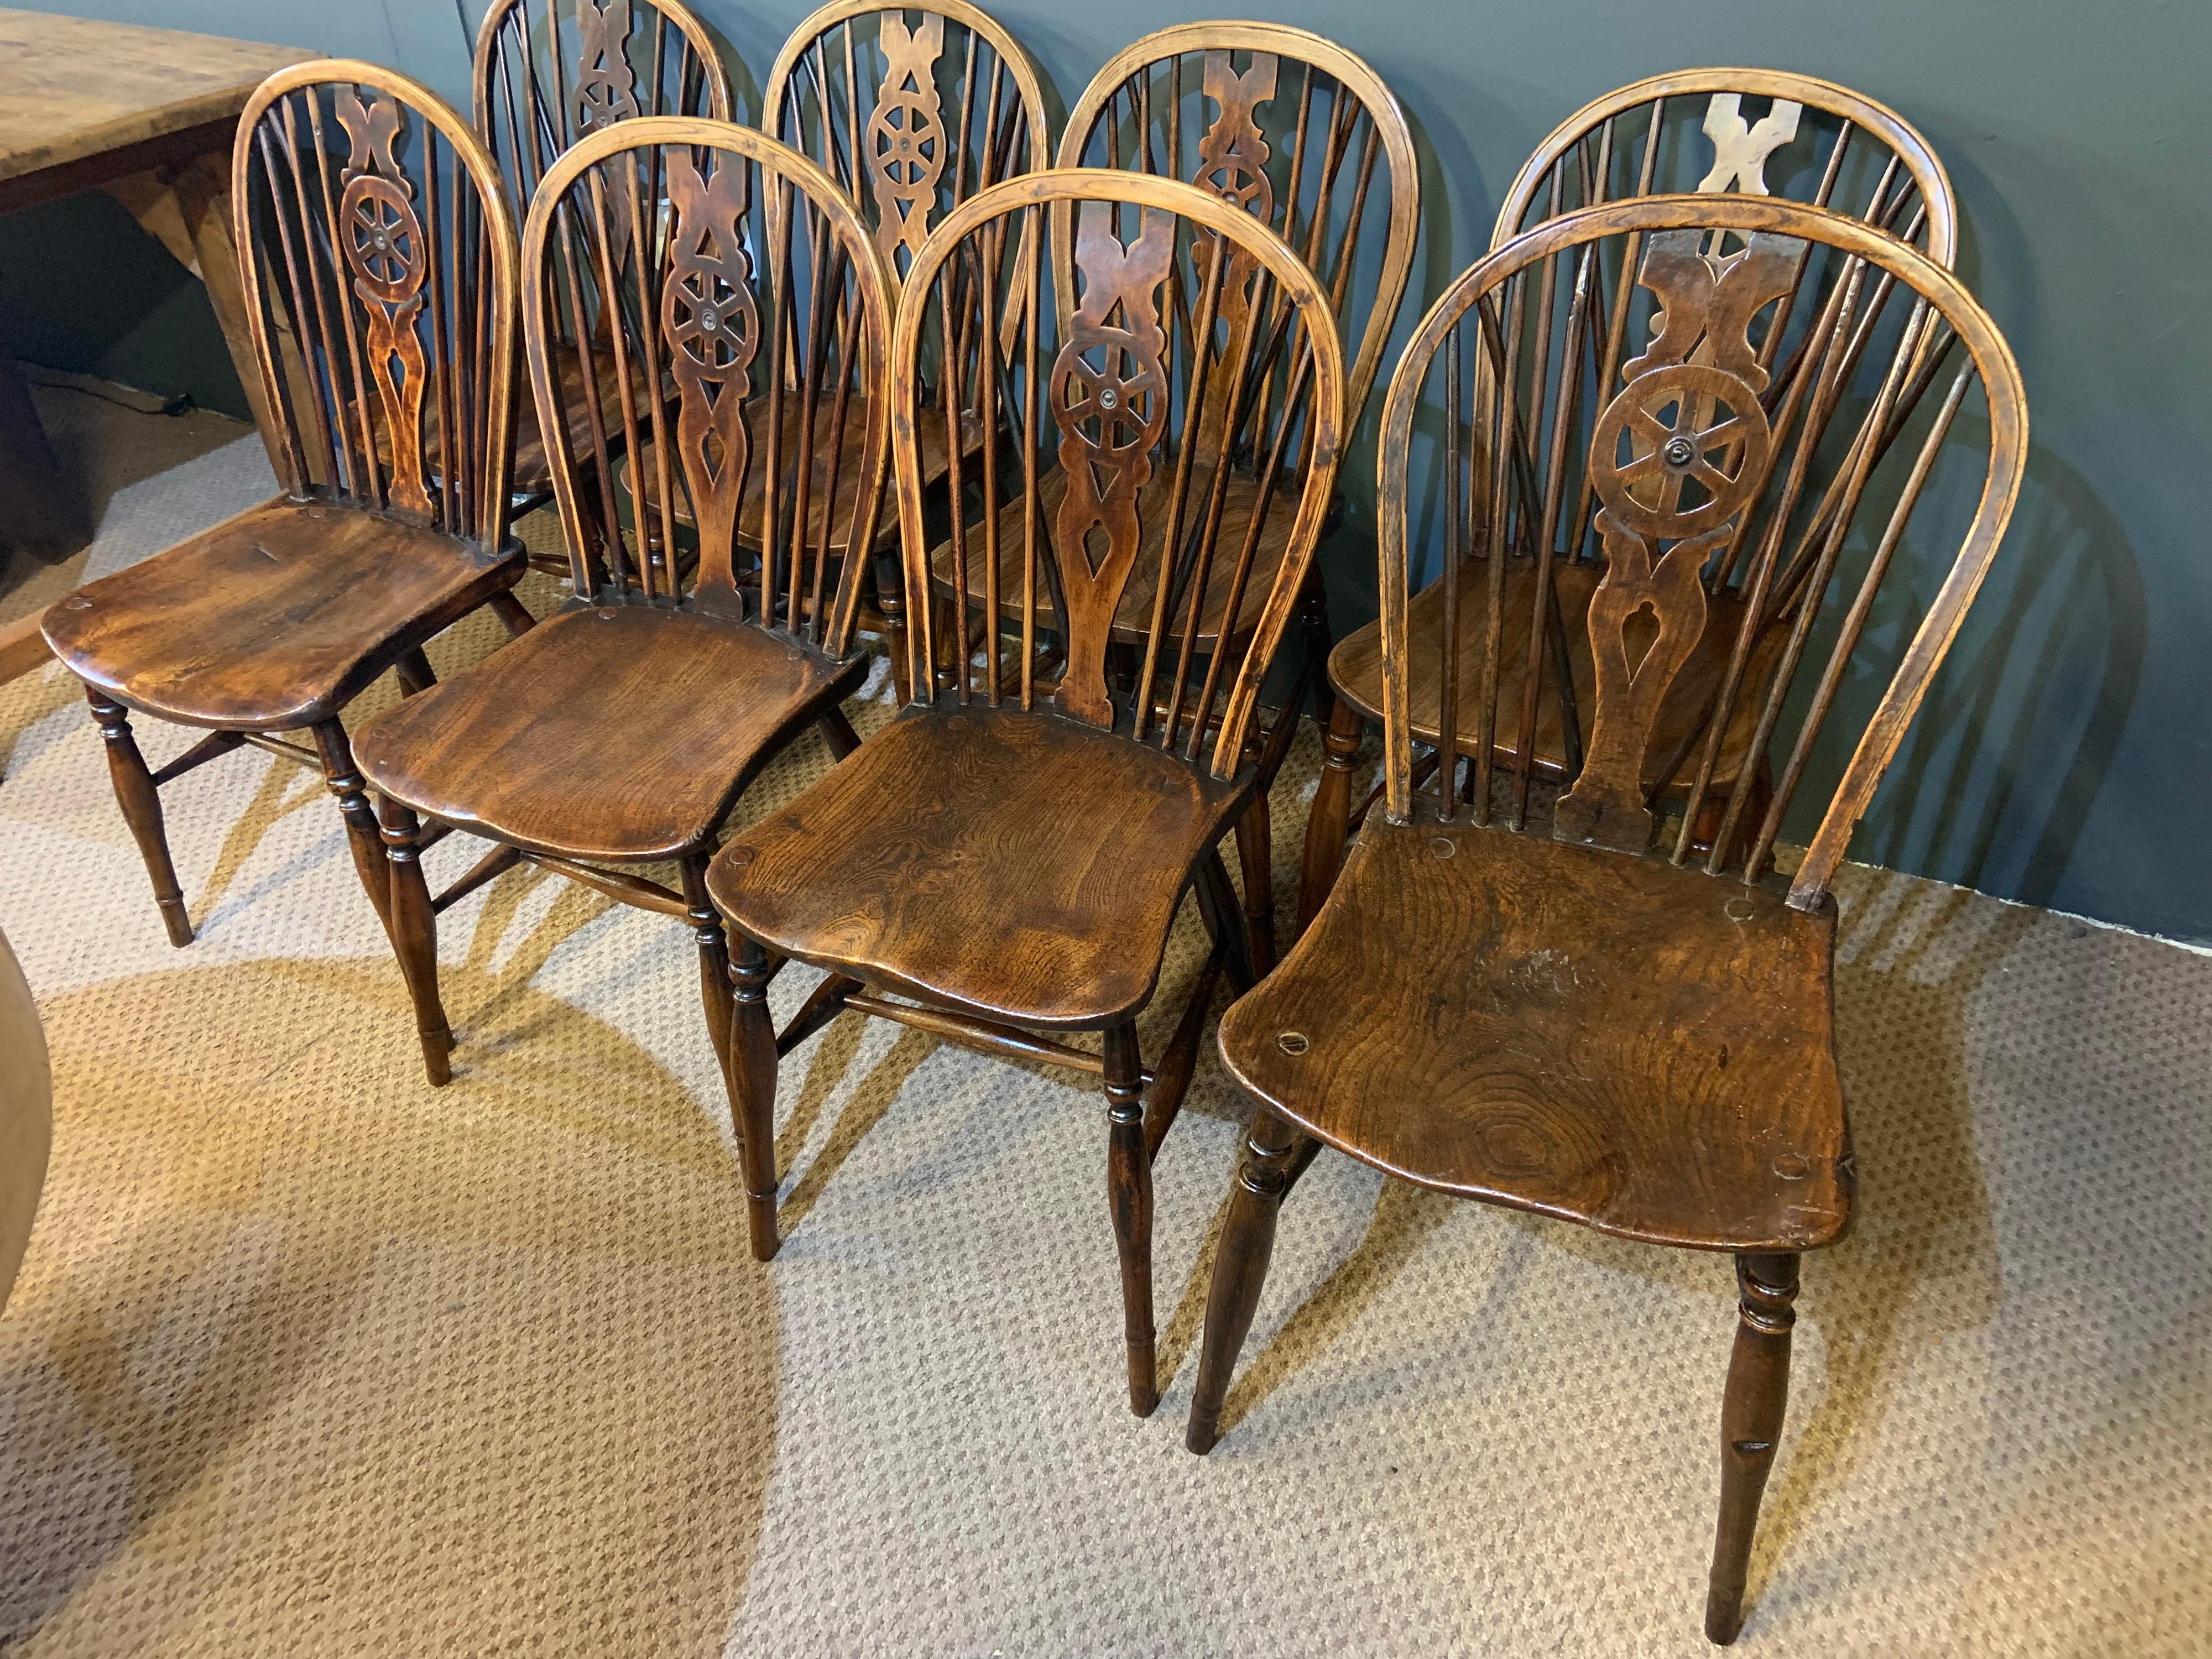 A harlequin set of eight 18th Century Windsor Wheel back chairs fully restored. Beautiful patination and colour.